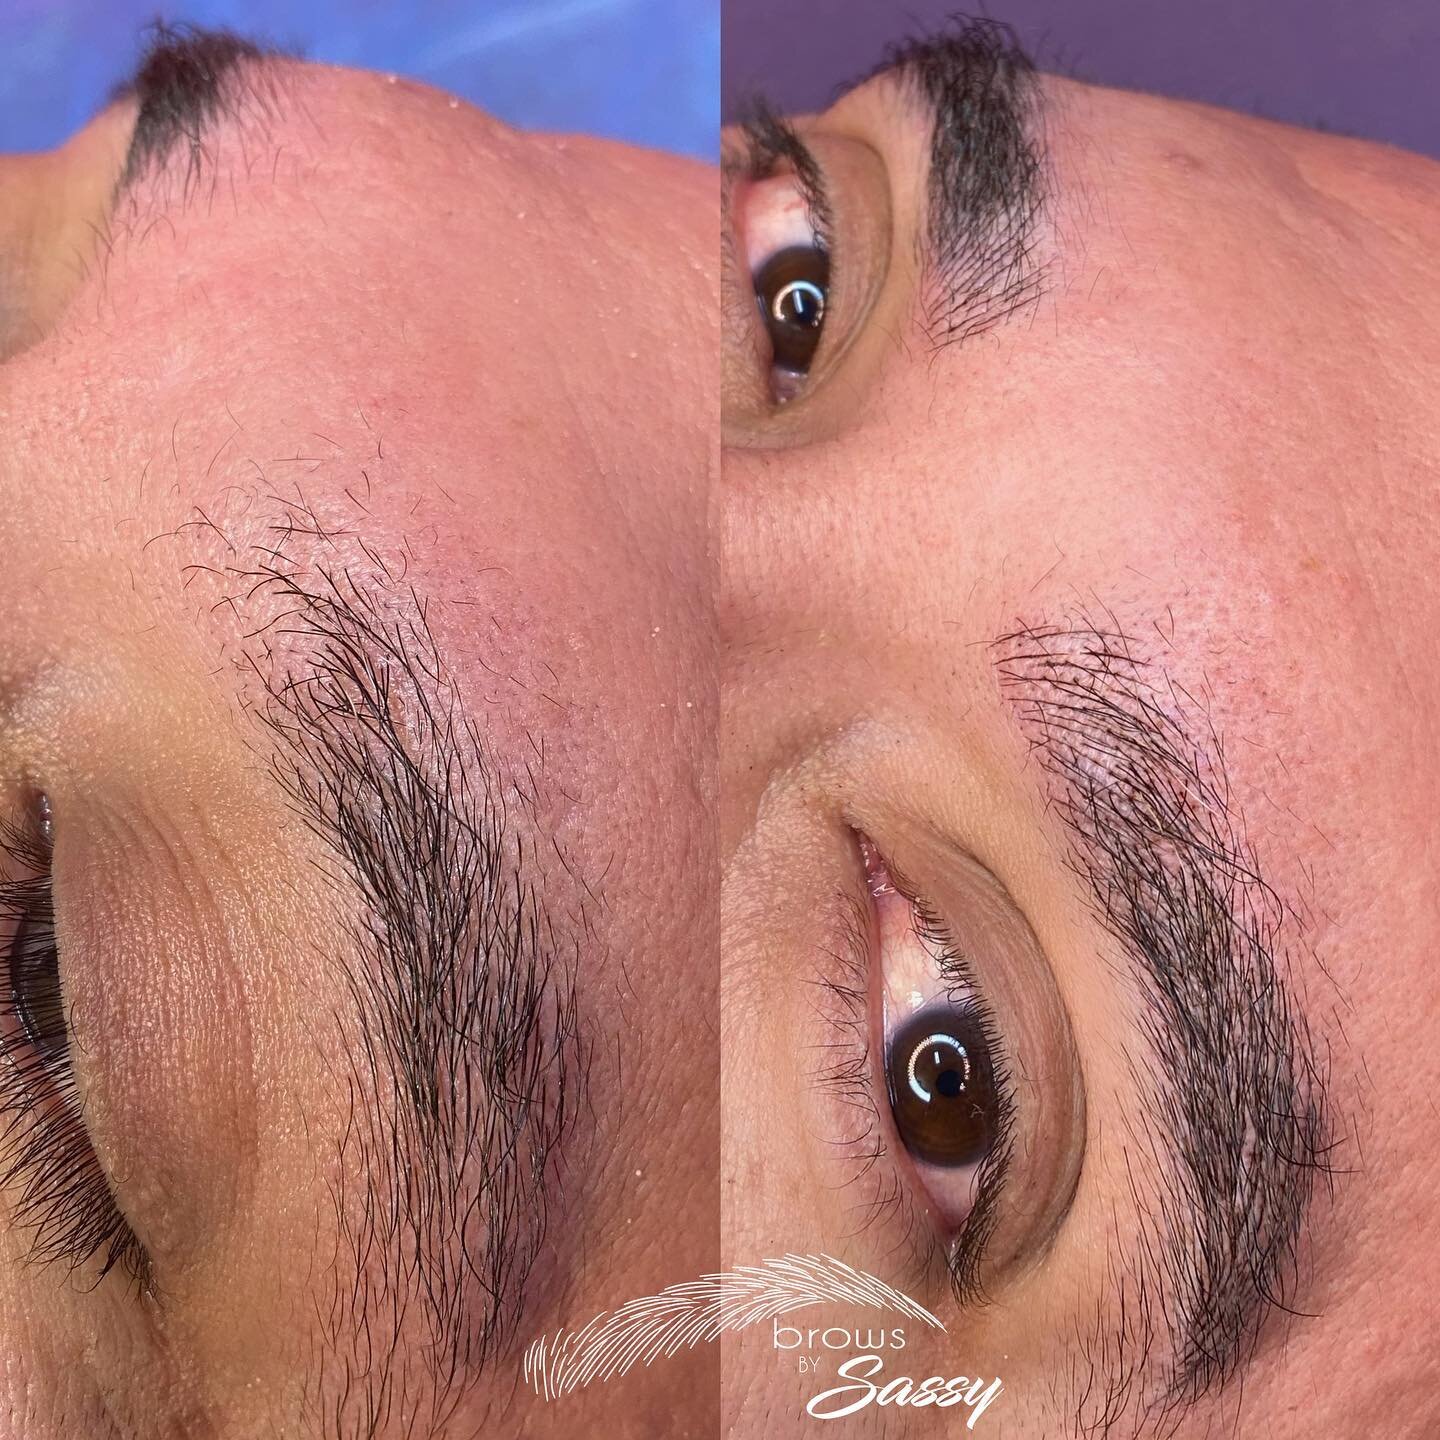 Alopecia who?! If you suffer from brow hair loss this is for you! 

Microblading  waterproof and natural looking brows! 
The procedure involves tiny strokes that build a texture that looks like your own eyebrow hair. Microblading results can last 12-